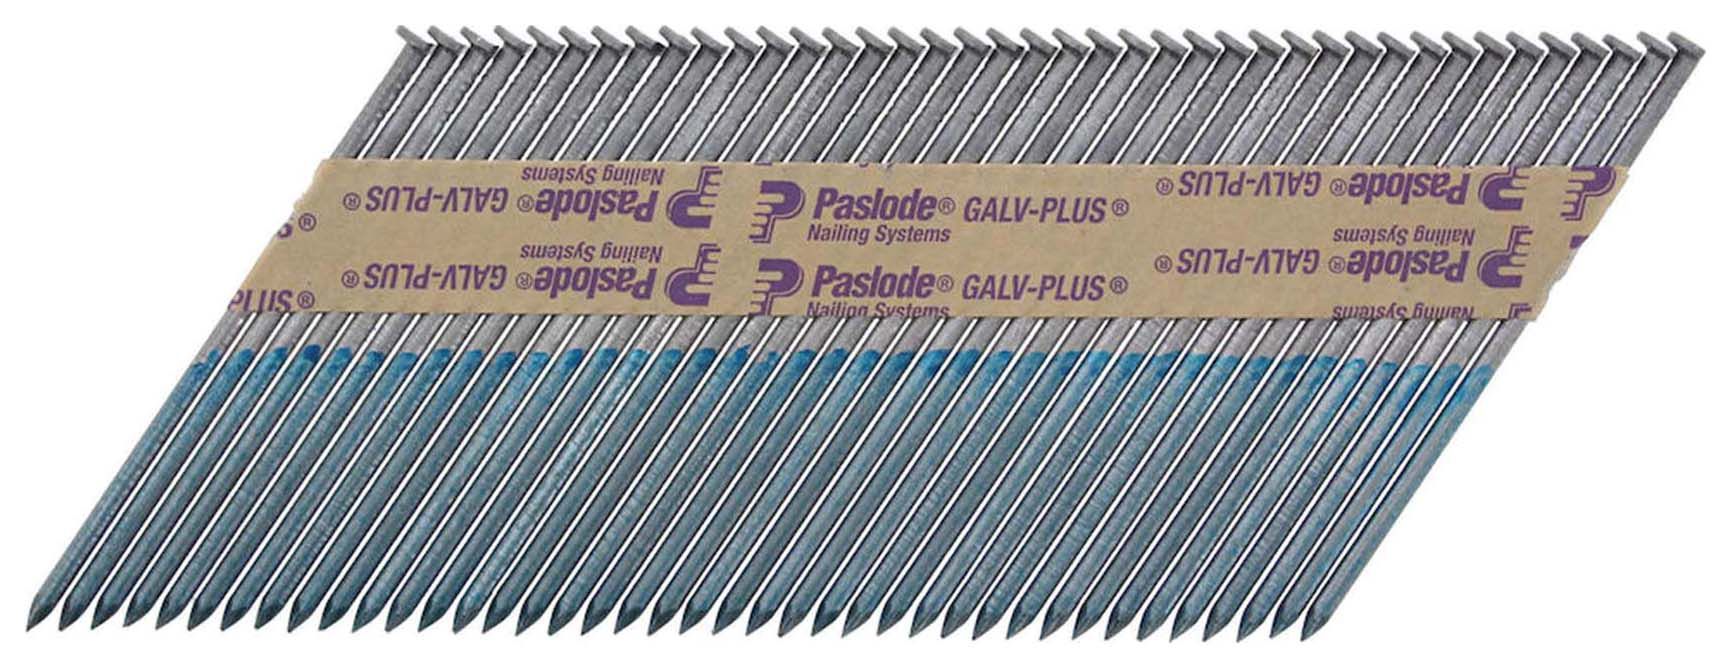 Paslode IM350 3.1mm x 90mm Collated Galvanized Nails + 2 Fuel Cells - Box of 2200